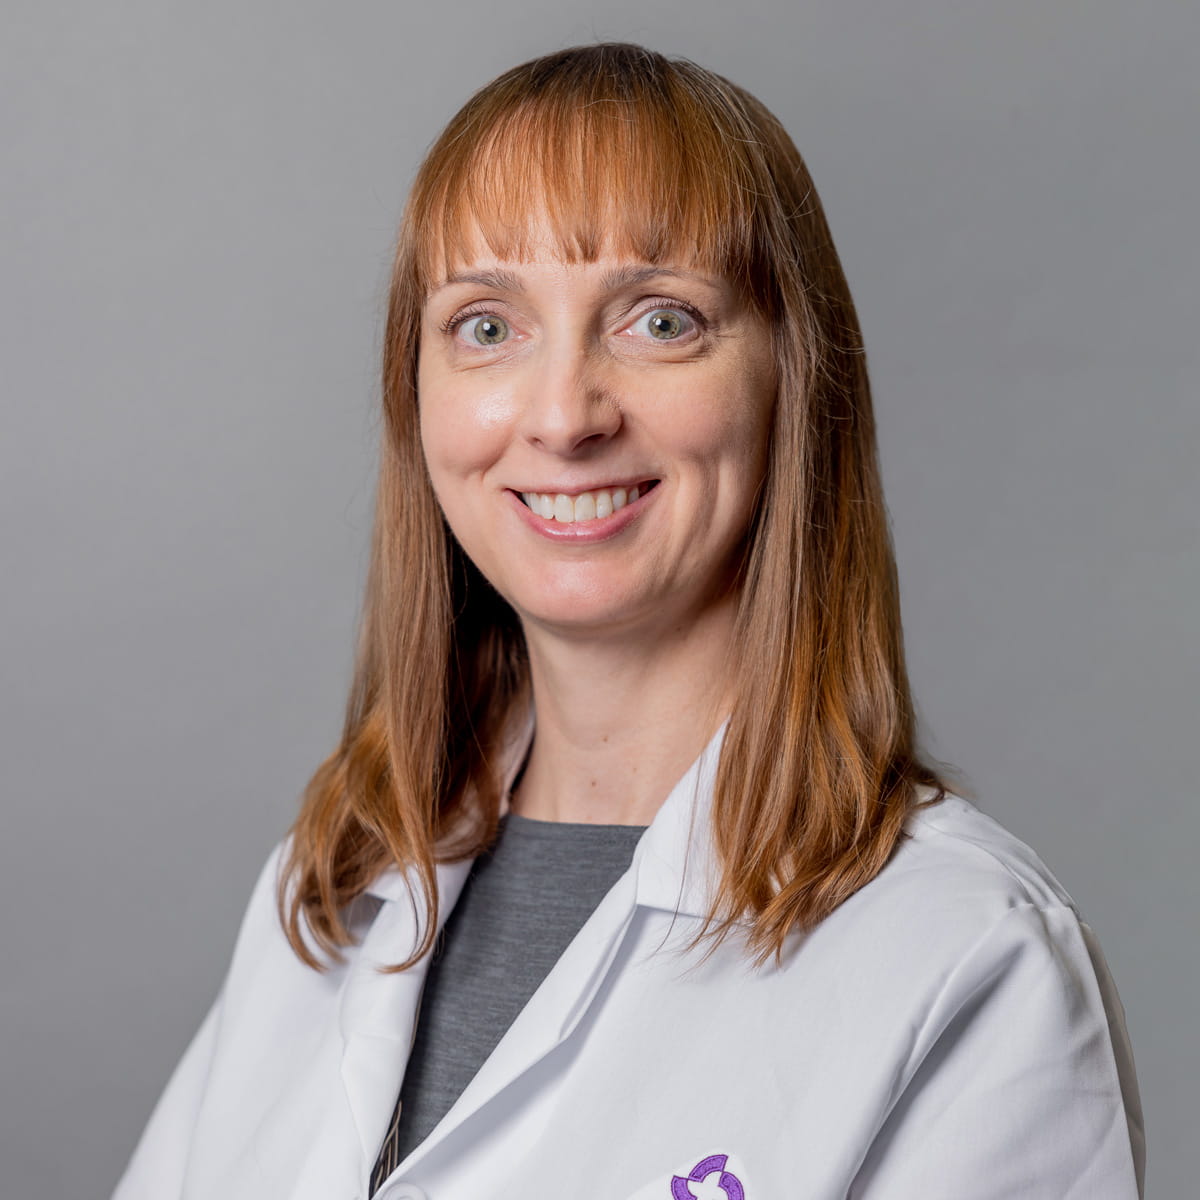 A friendly image of Aimee Popp MD